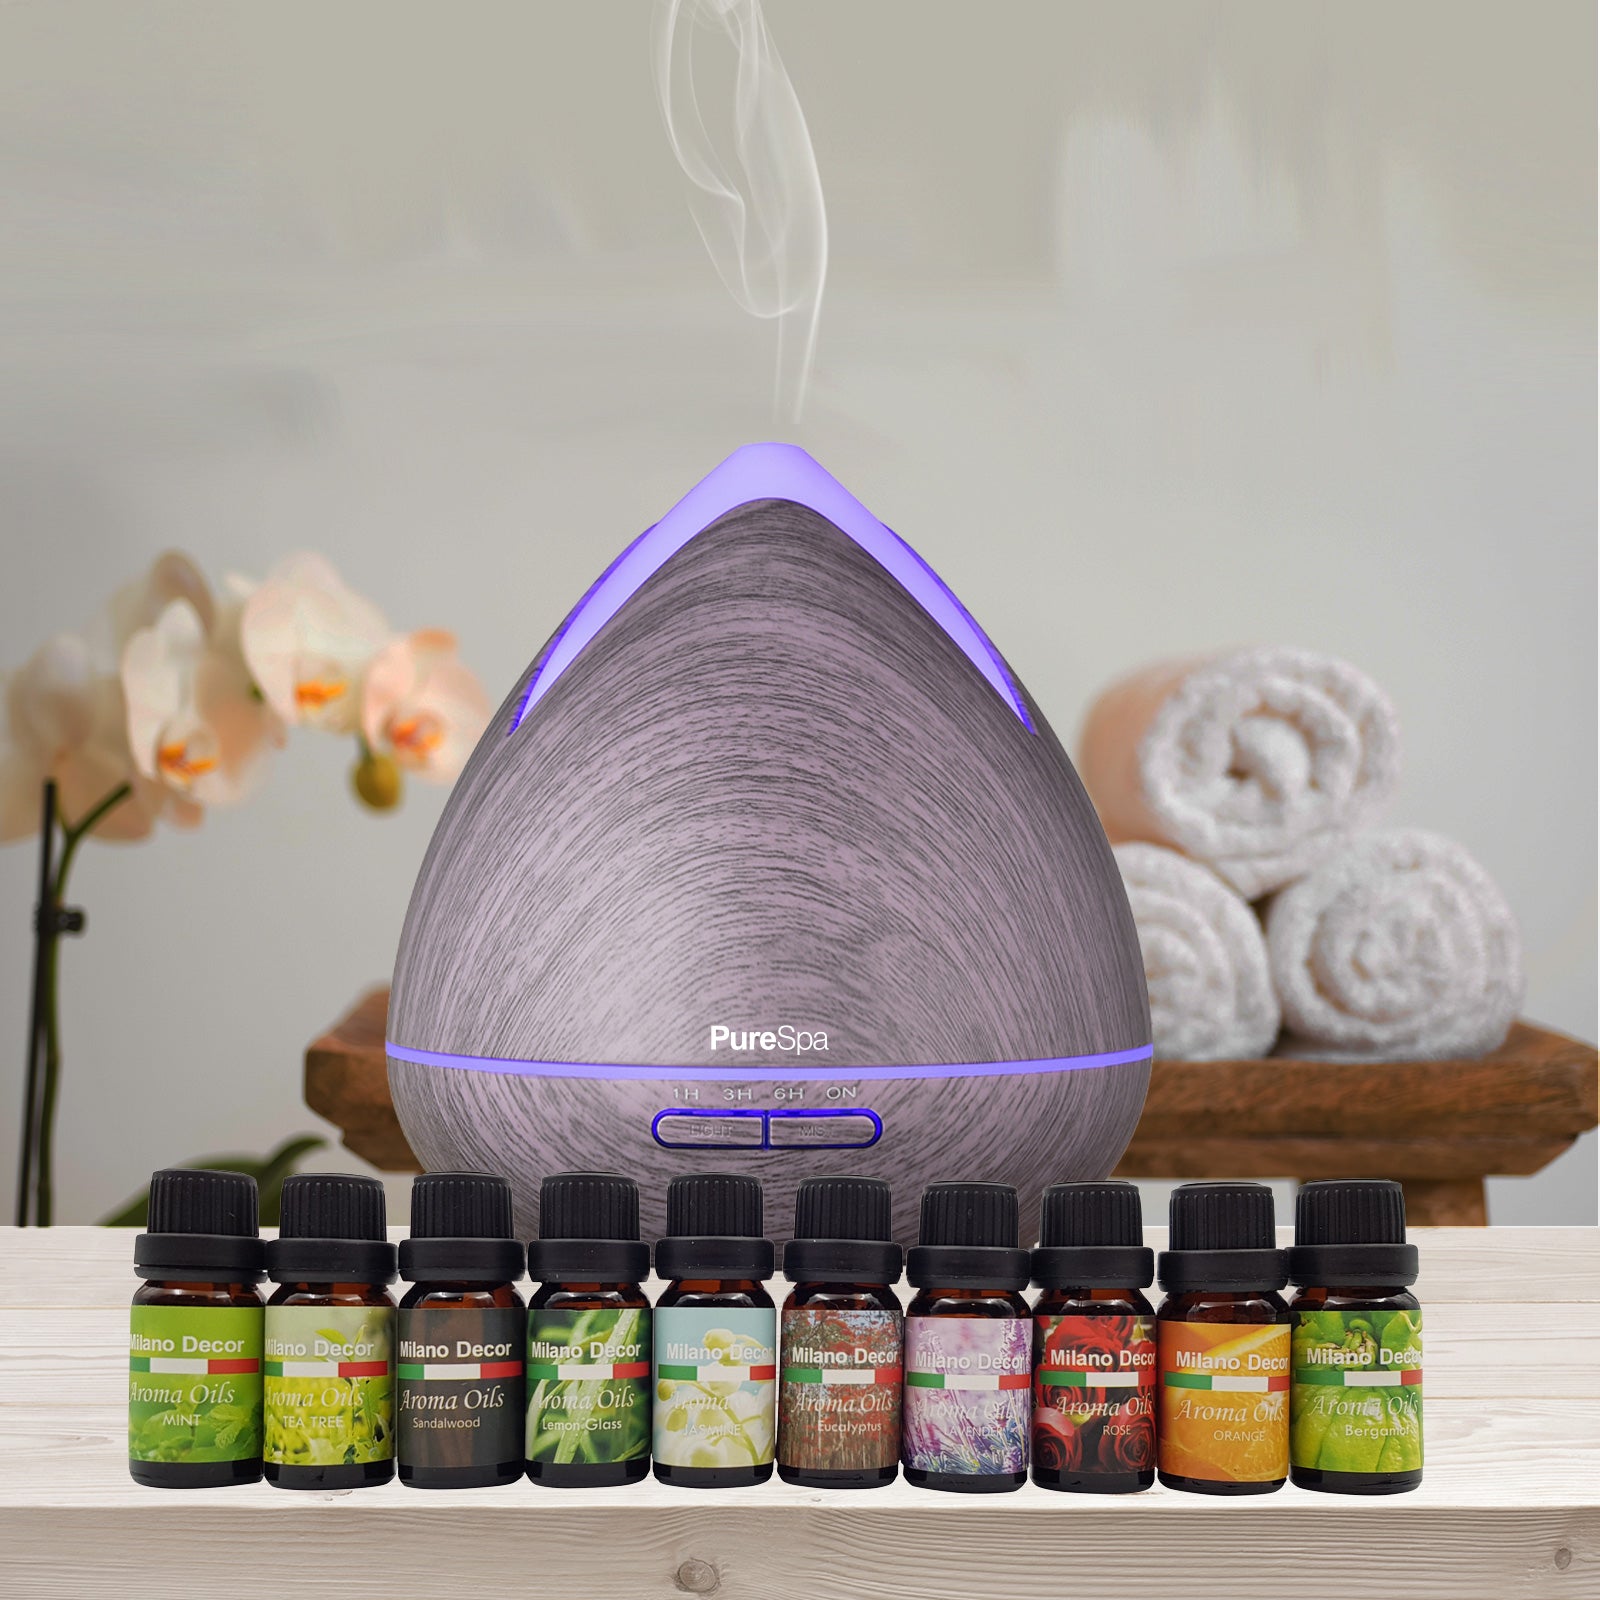 Purespa Diffuser Set With 10 Pack Diffuser Oils Humidifier Aromatherapy - Violet - SILBERSHELL